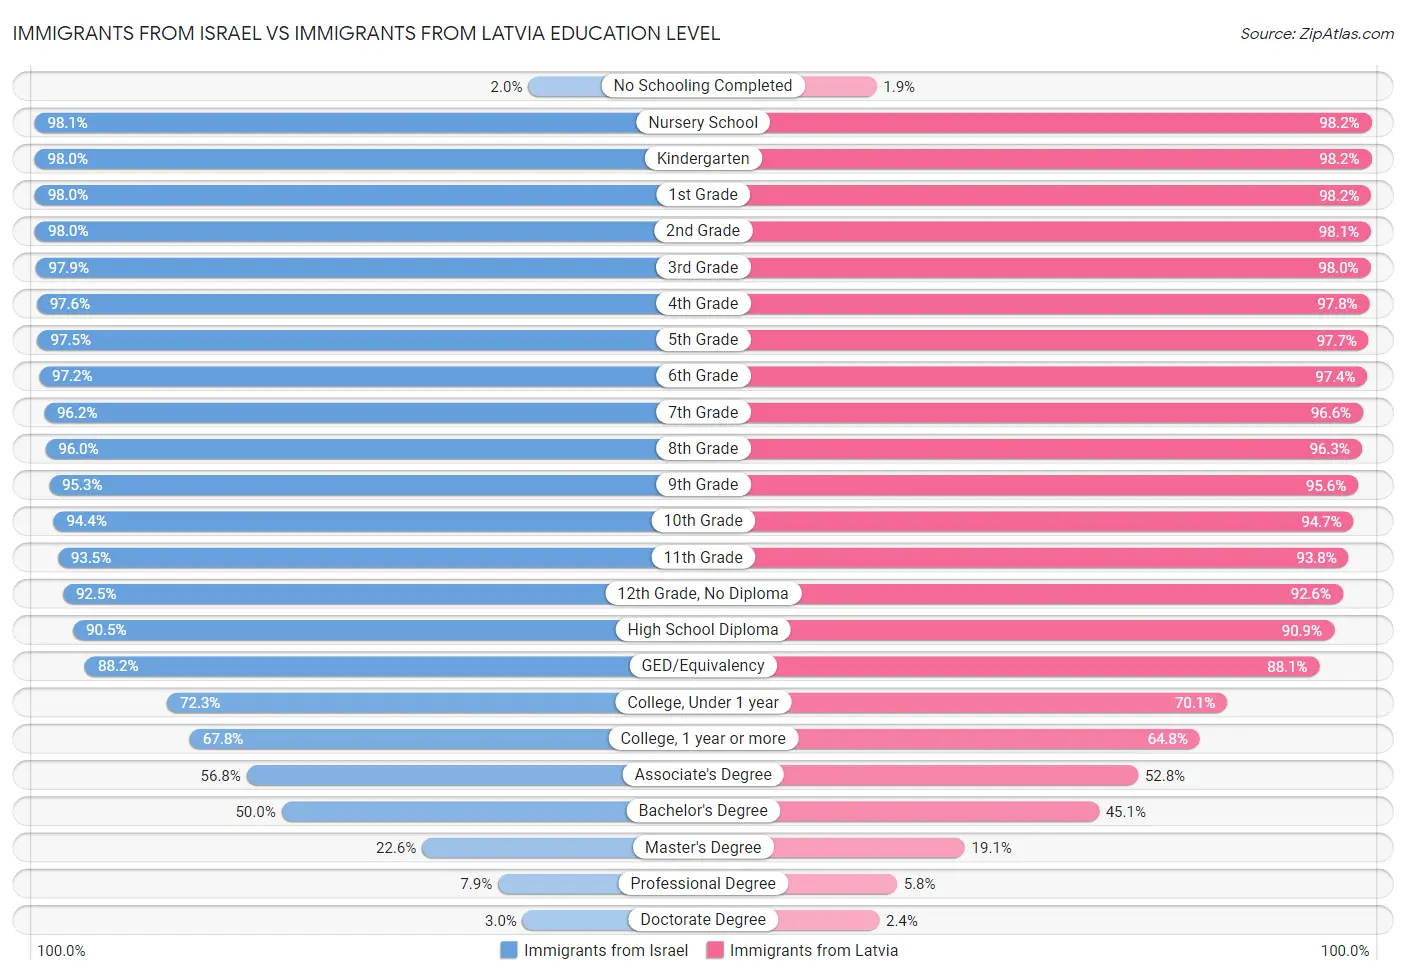 Immigrants from Israel vs Immigrants from Latvia Education Level